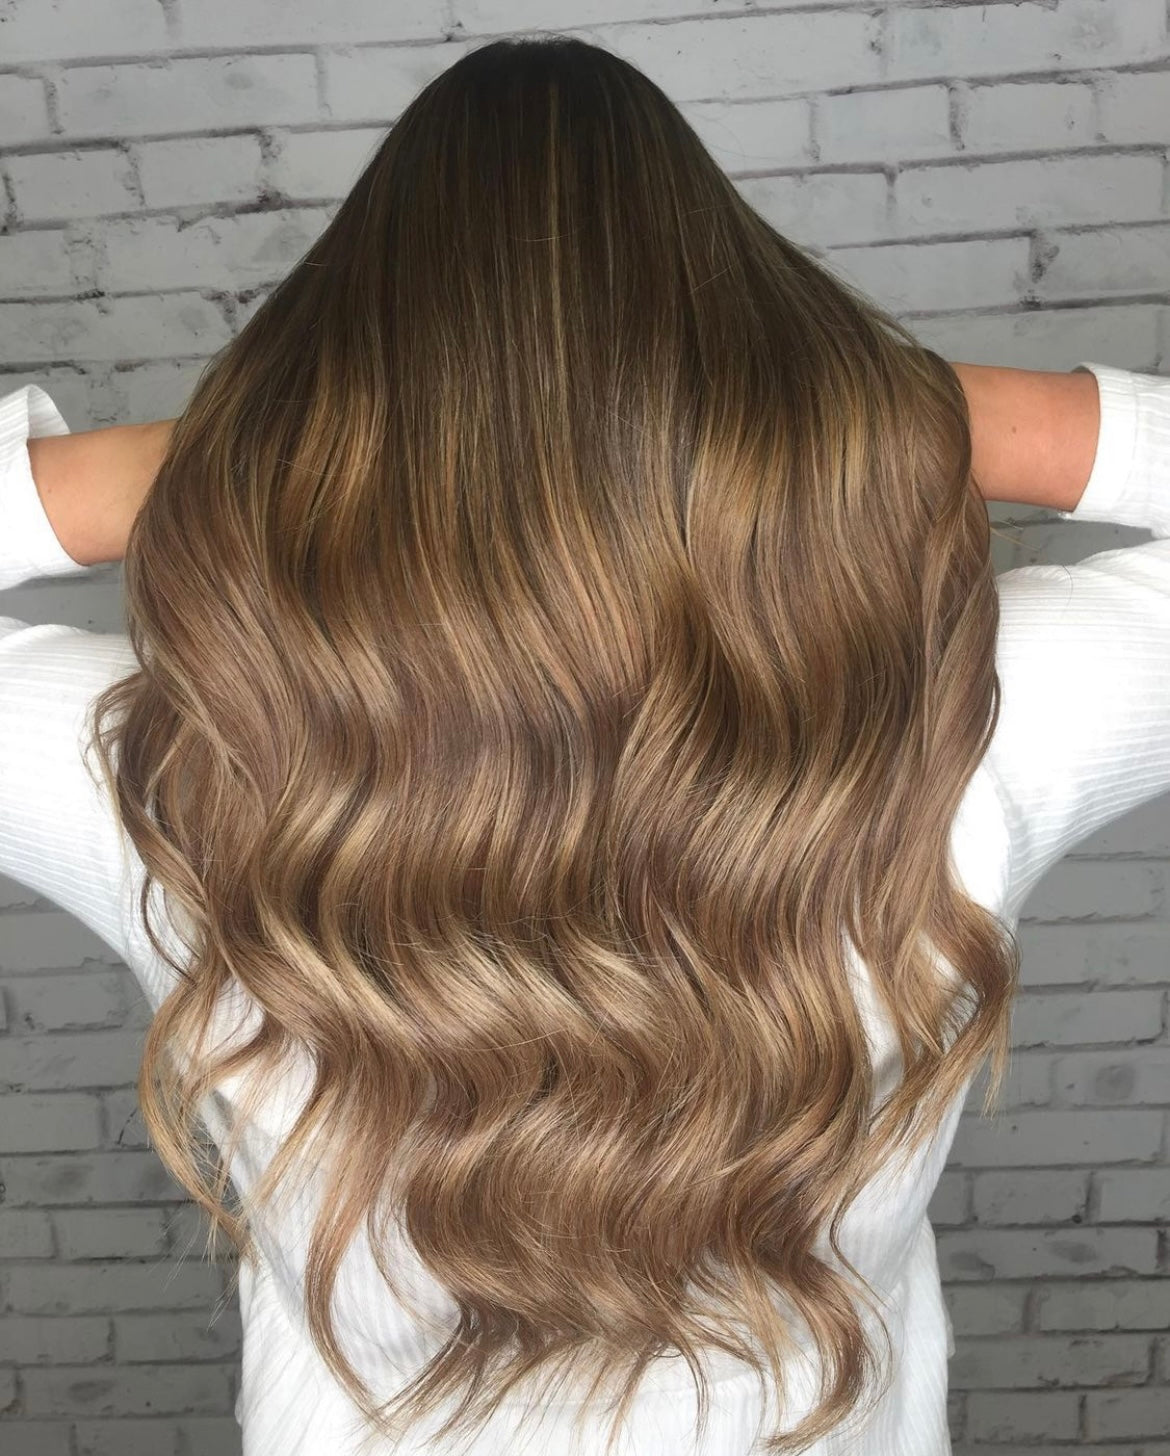 #Bronde Balayage Classic Clip In Hair Extensions 9pcs